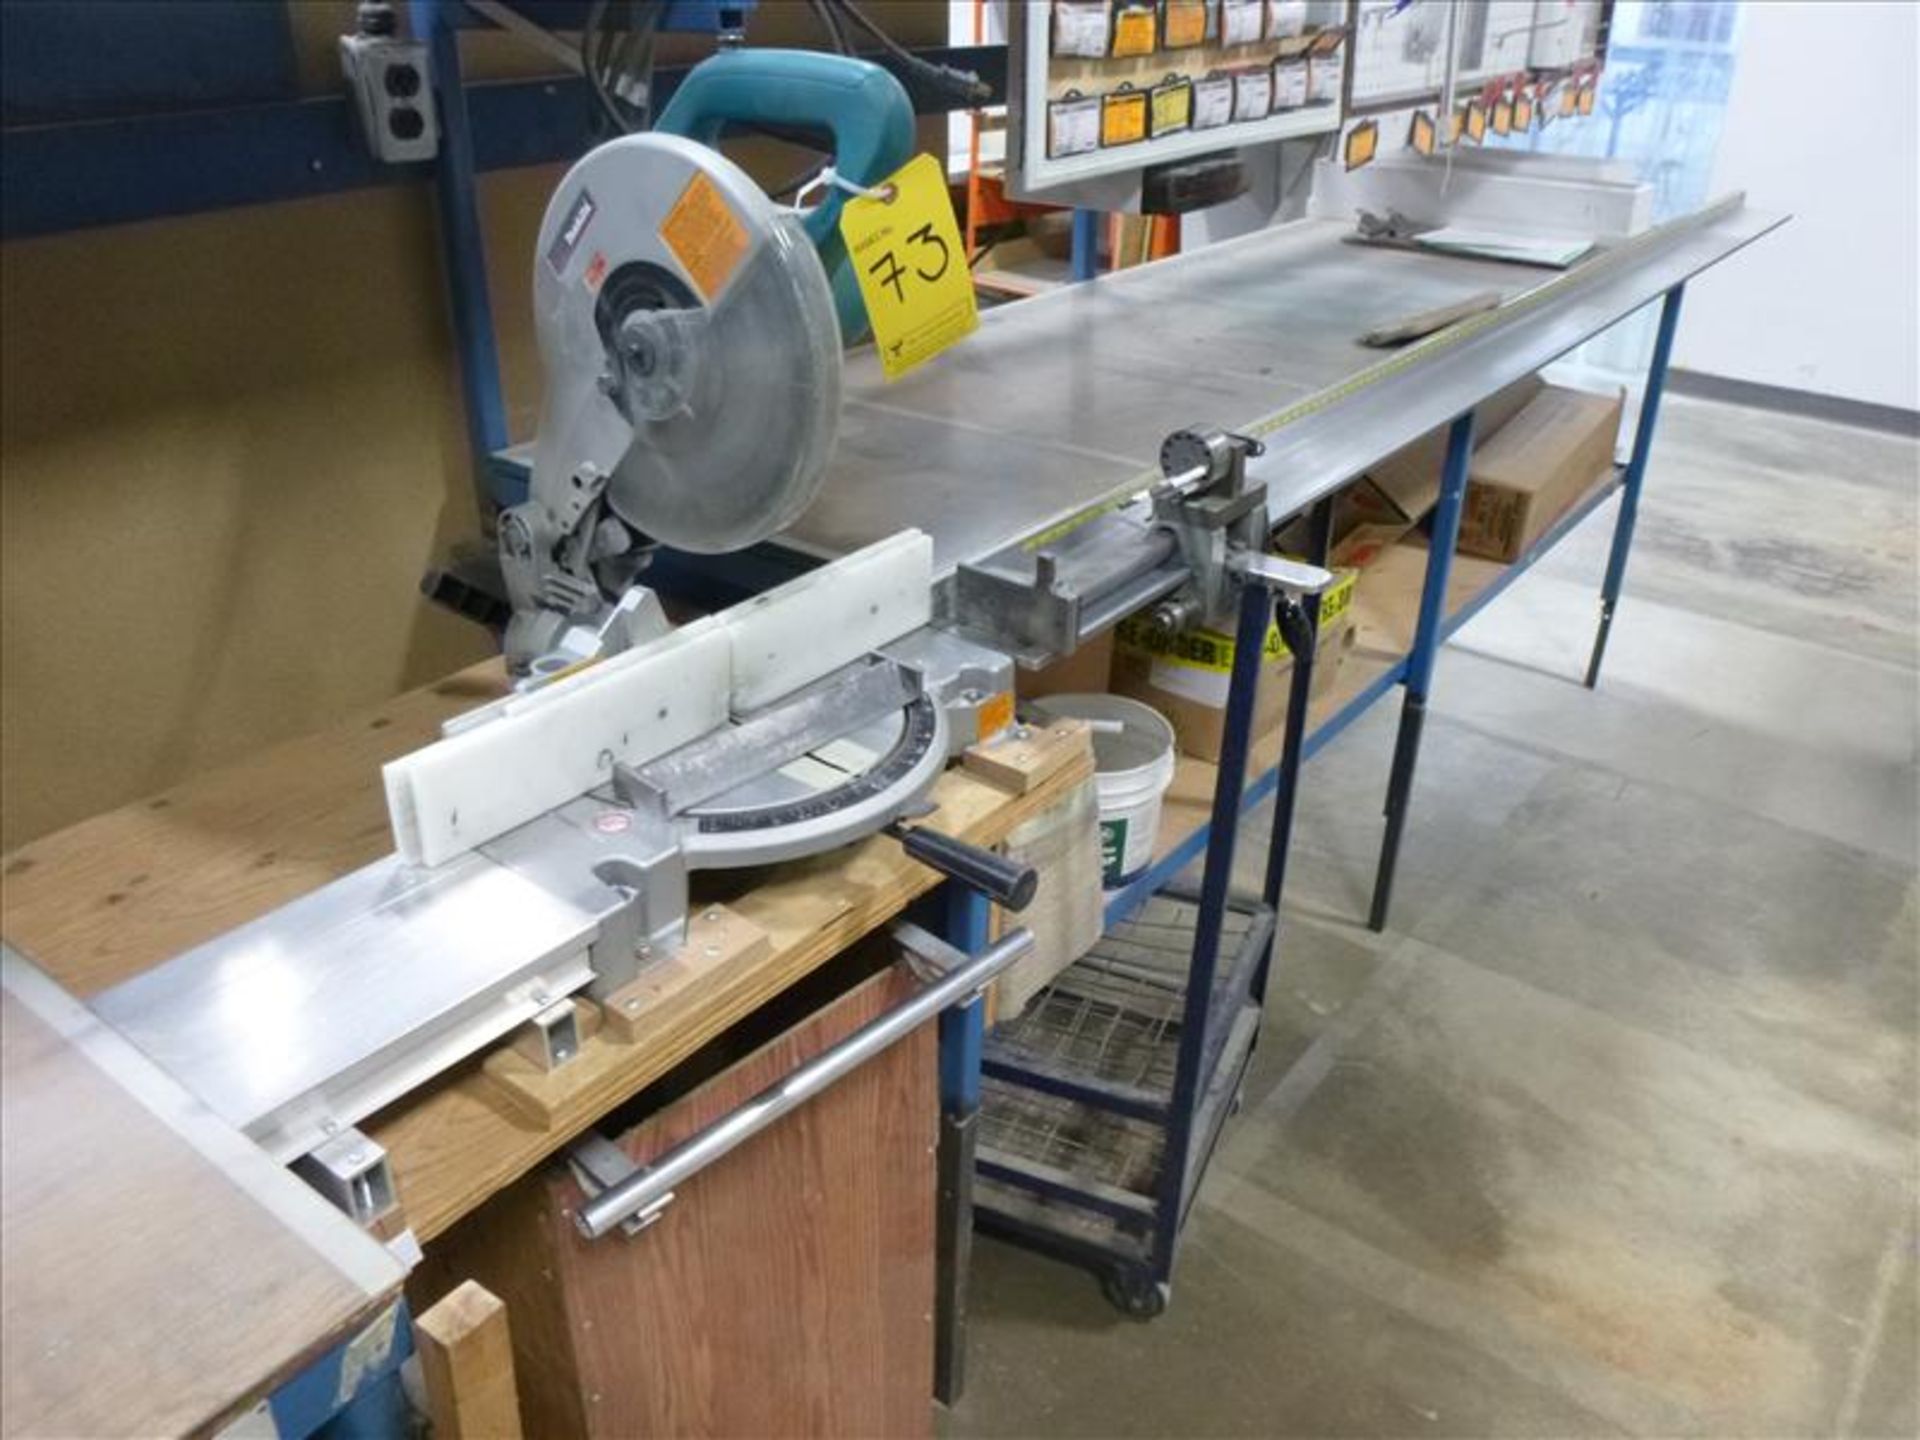 Makita 10" mitre saw c/w worktables & length stop [Winner will be determined based on sum of bids on